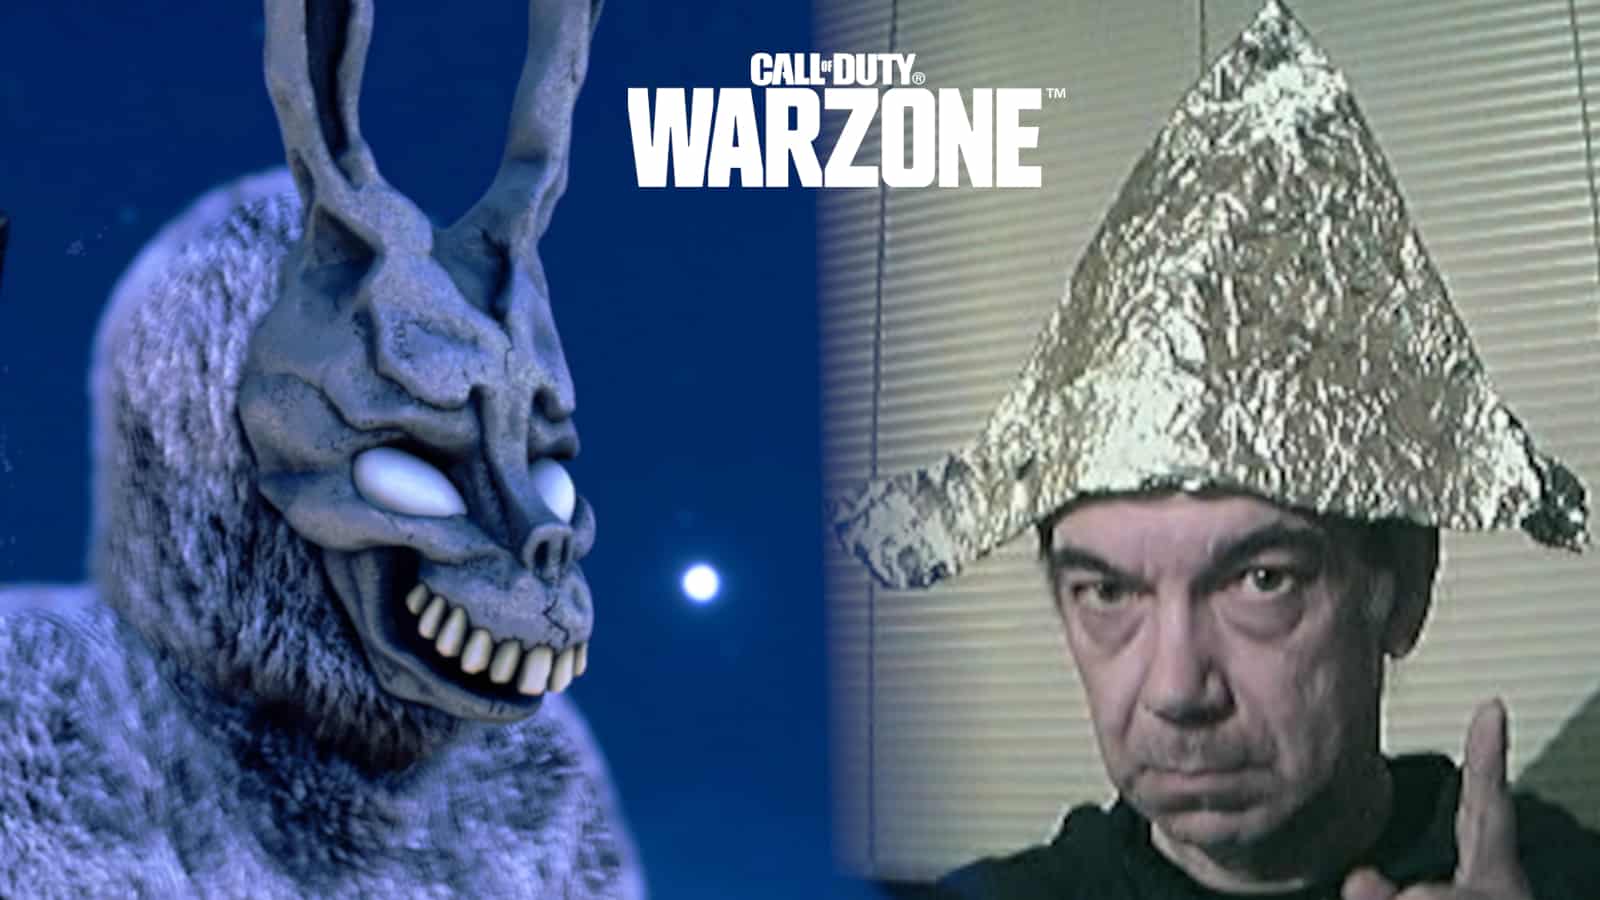 call of duty warzone tinfoil hat conspiracy theorist